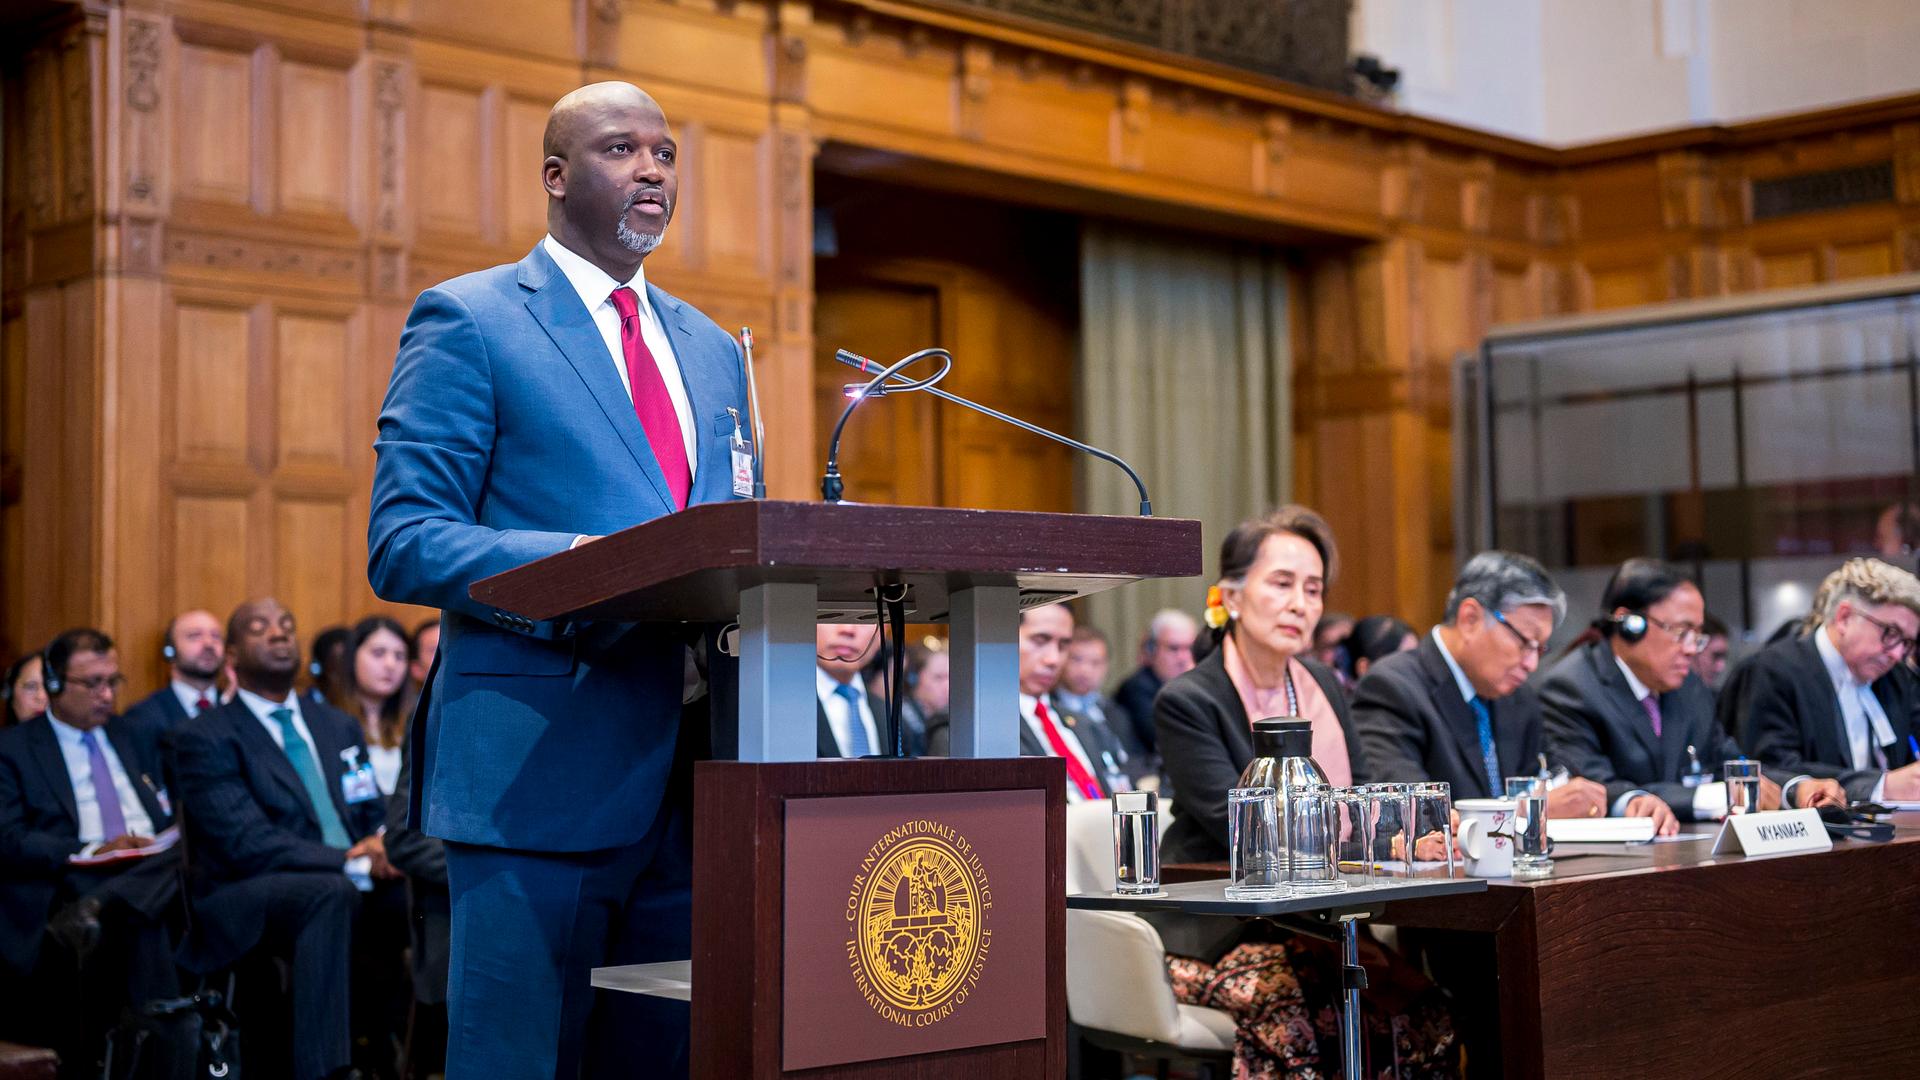 Gambia's Justice Minister Abubacarr Tambadou speaks on the first day of hearings in a case against Myanmar alleging genocide against the minority Muslim Rohingya population at the International Court of Justice in The Hague, Netherlands.